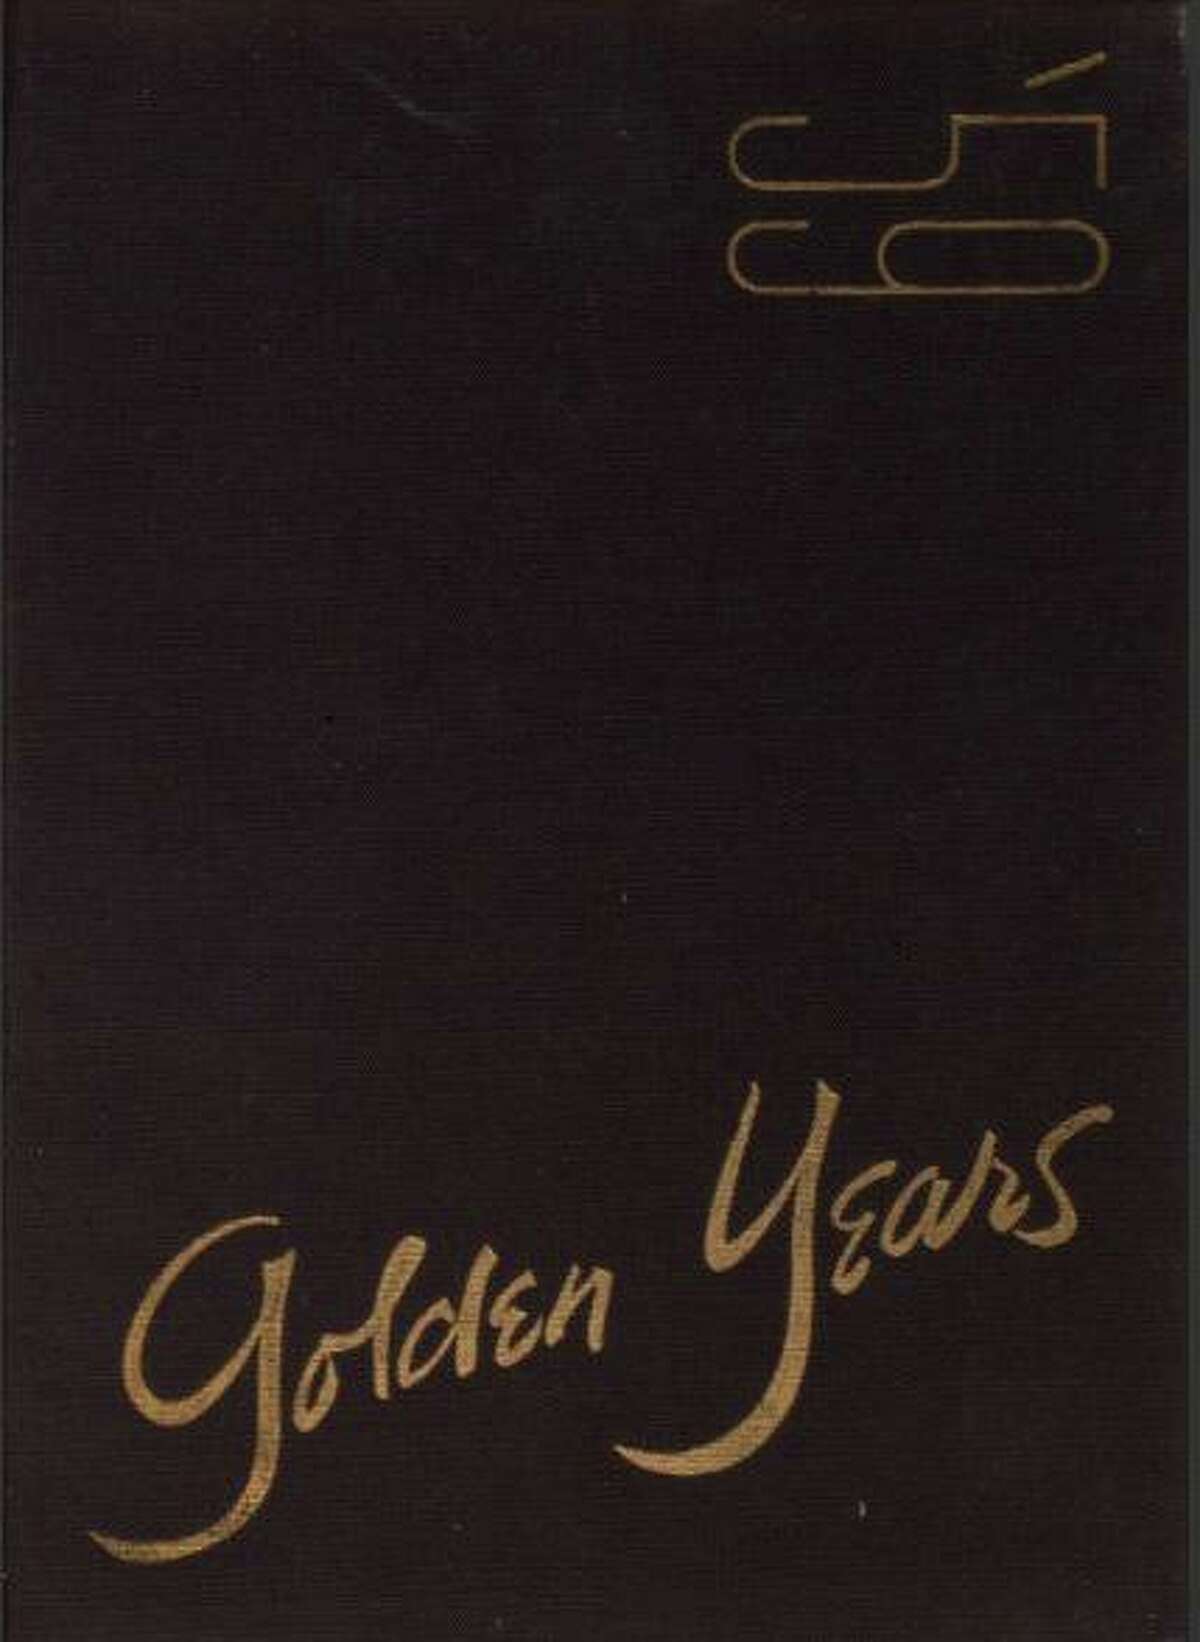 The cover of the Stamford High School Class of 1959 yearbook.